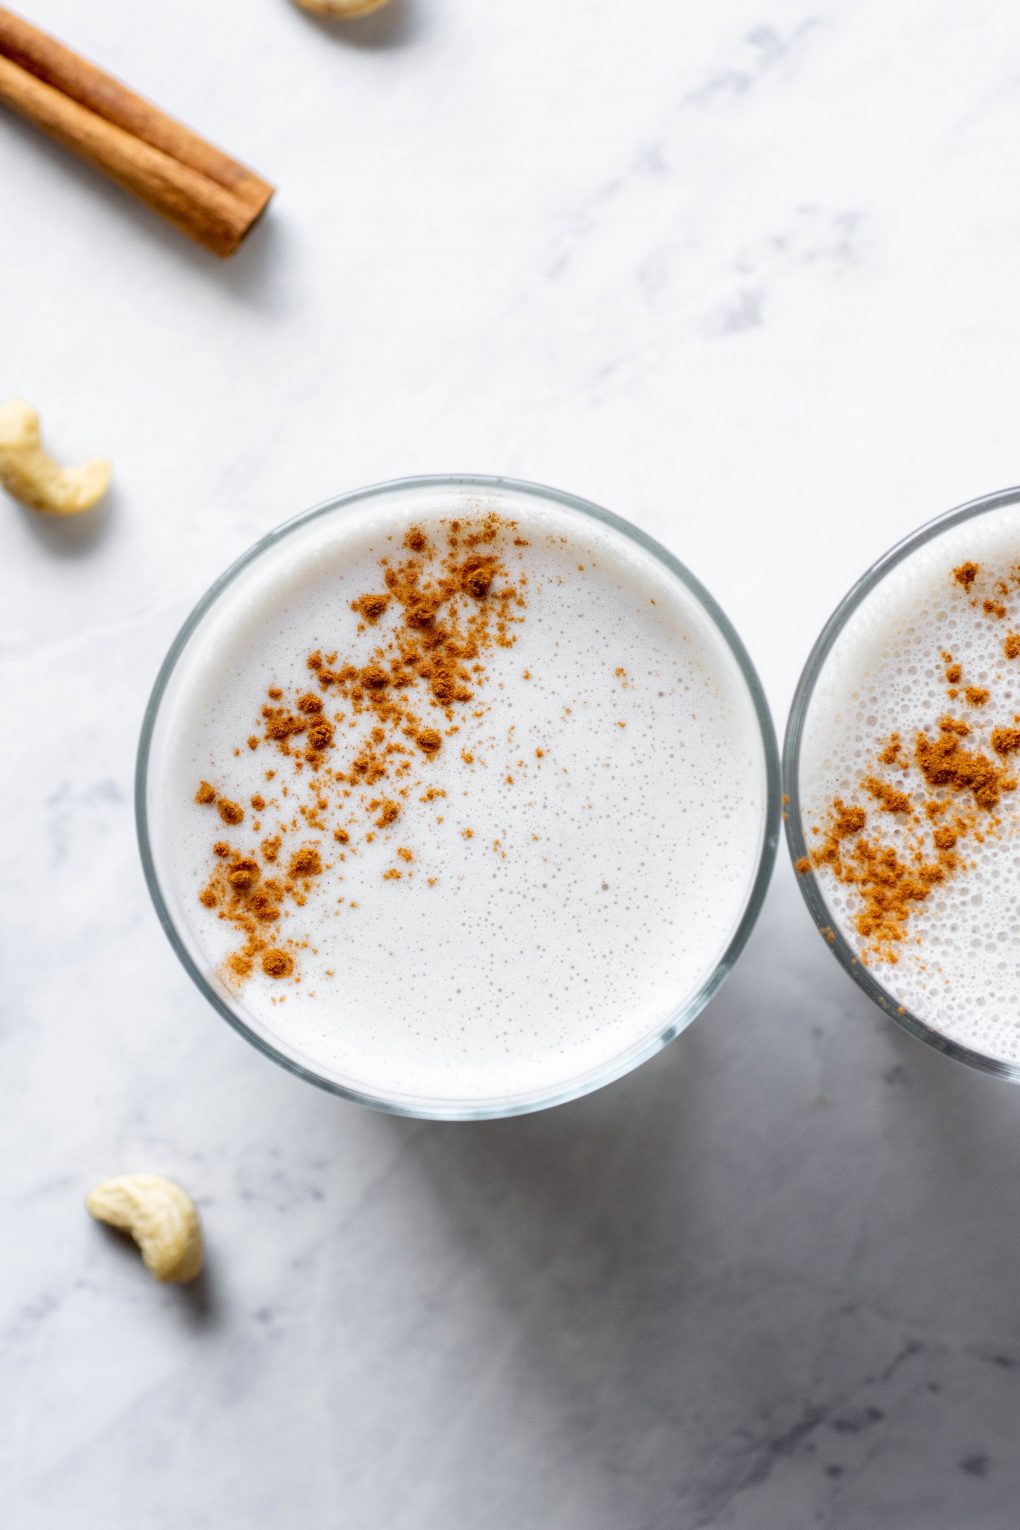 Overhead shot of two side by side glasses of cashew milk sprinkled with cinnamon on a marble background next to a cinnamon stick and some scattered cashews